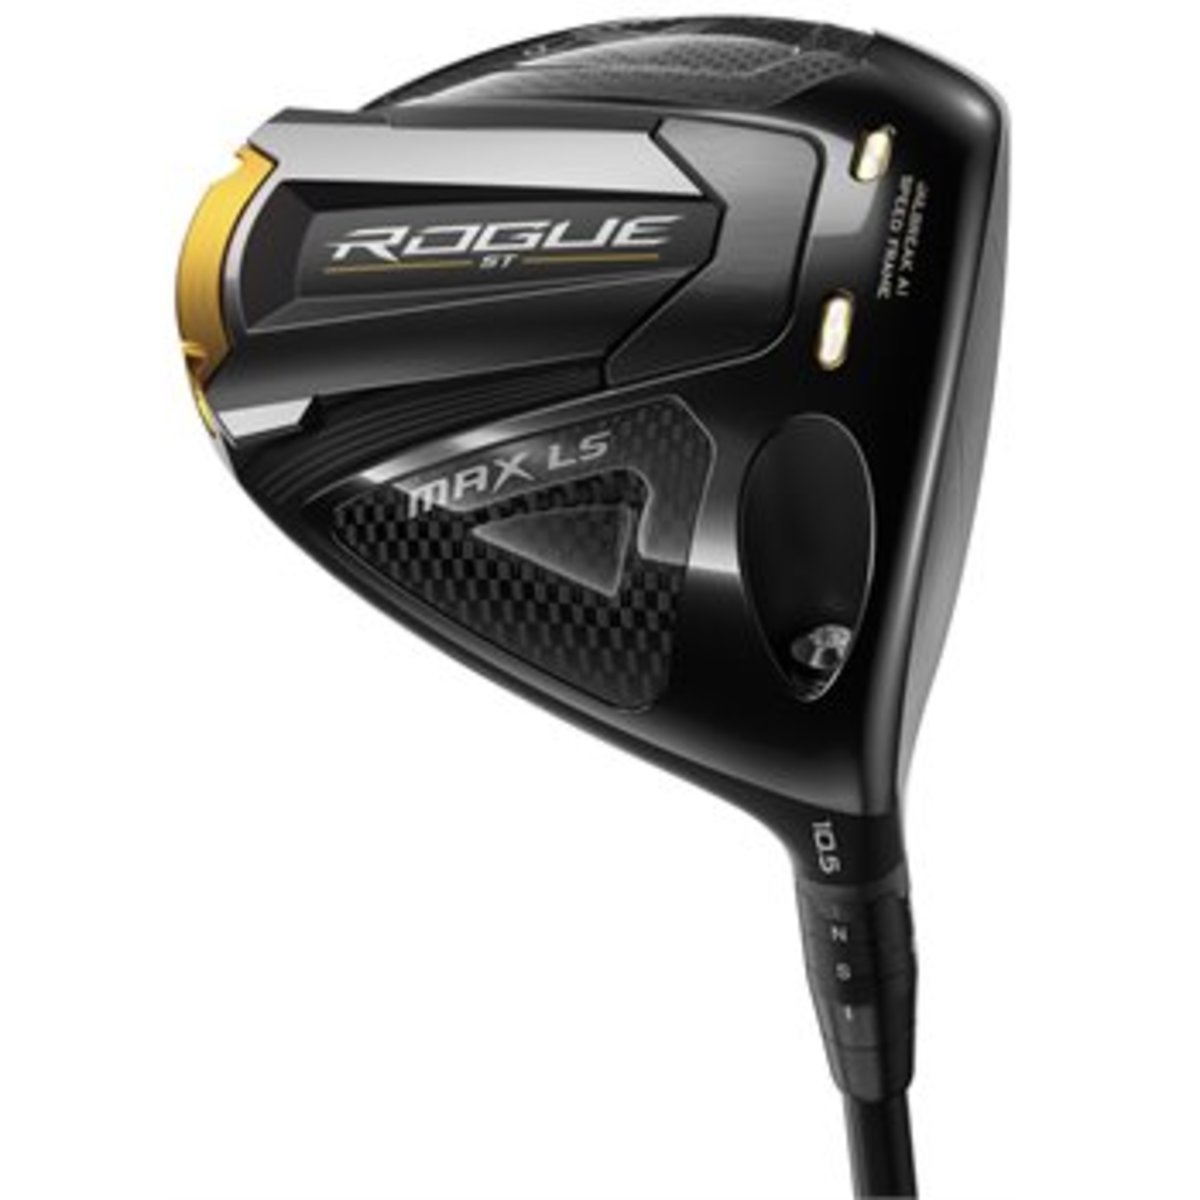 Find the 2022 Callaway Rogue ST drivers on Morning Read's Pro Shop, powered by GlobalGolf.